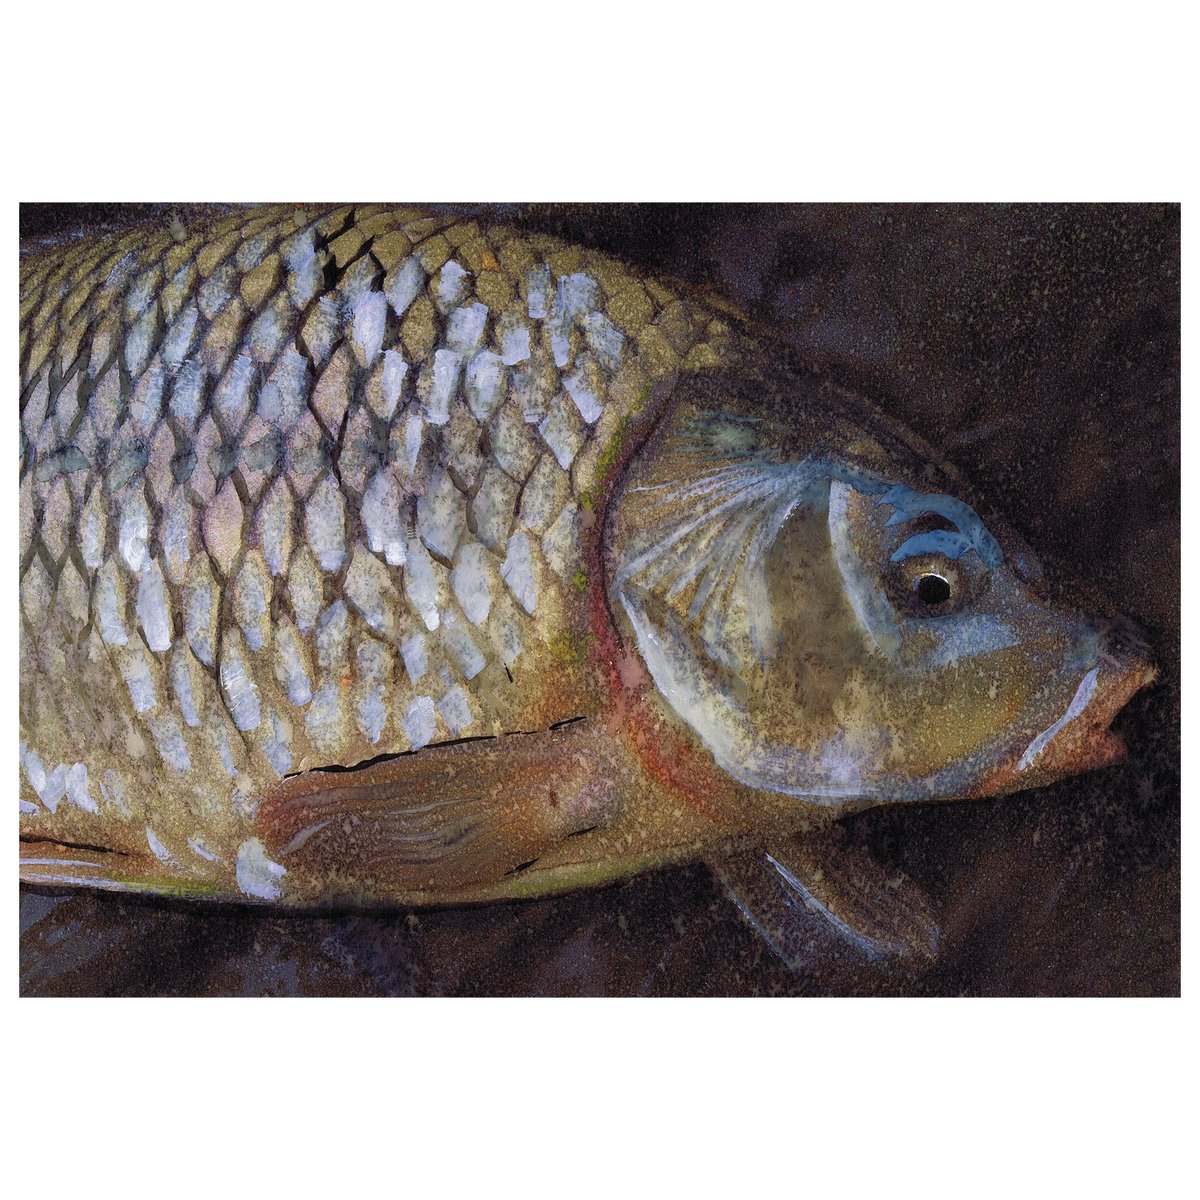 Carp Wall Art Print, Freshwater Carp Fishing Wall Décor, Hand-Signed Fishing Décor Gift By Jack Tarpon, Choice Of Sizes 11x14 12x16 tuppu.net/1c308a1a #Etsy #DogFishArtCo #RetirementDad